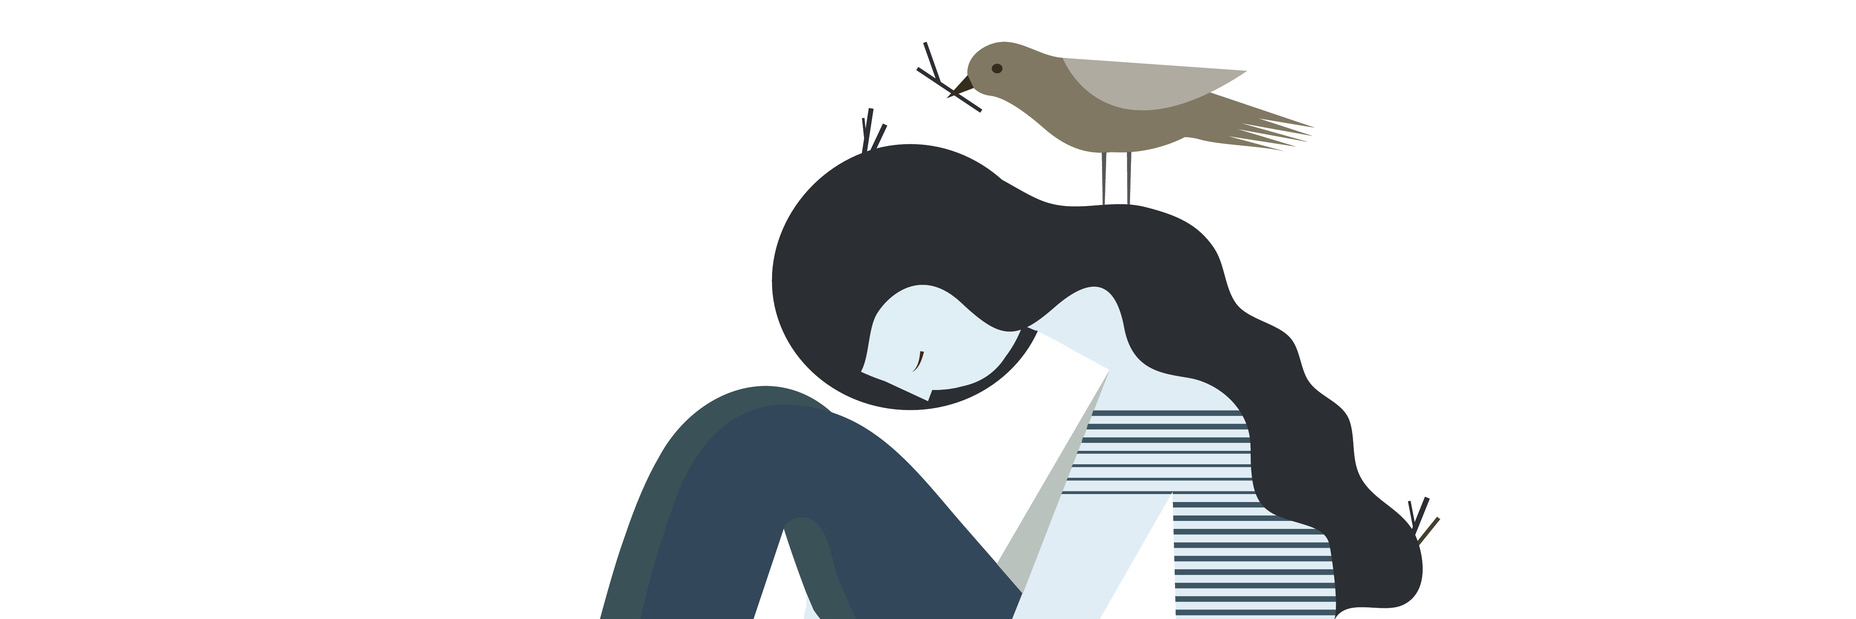 illustration of woman curled up with birds around her